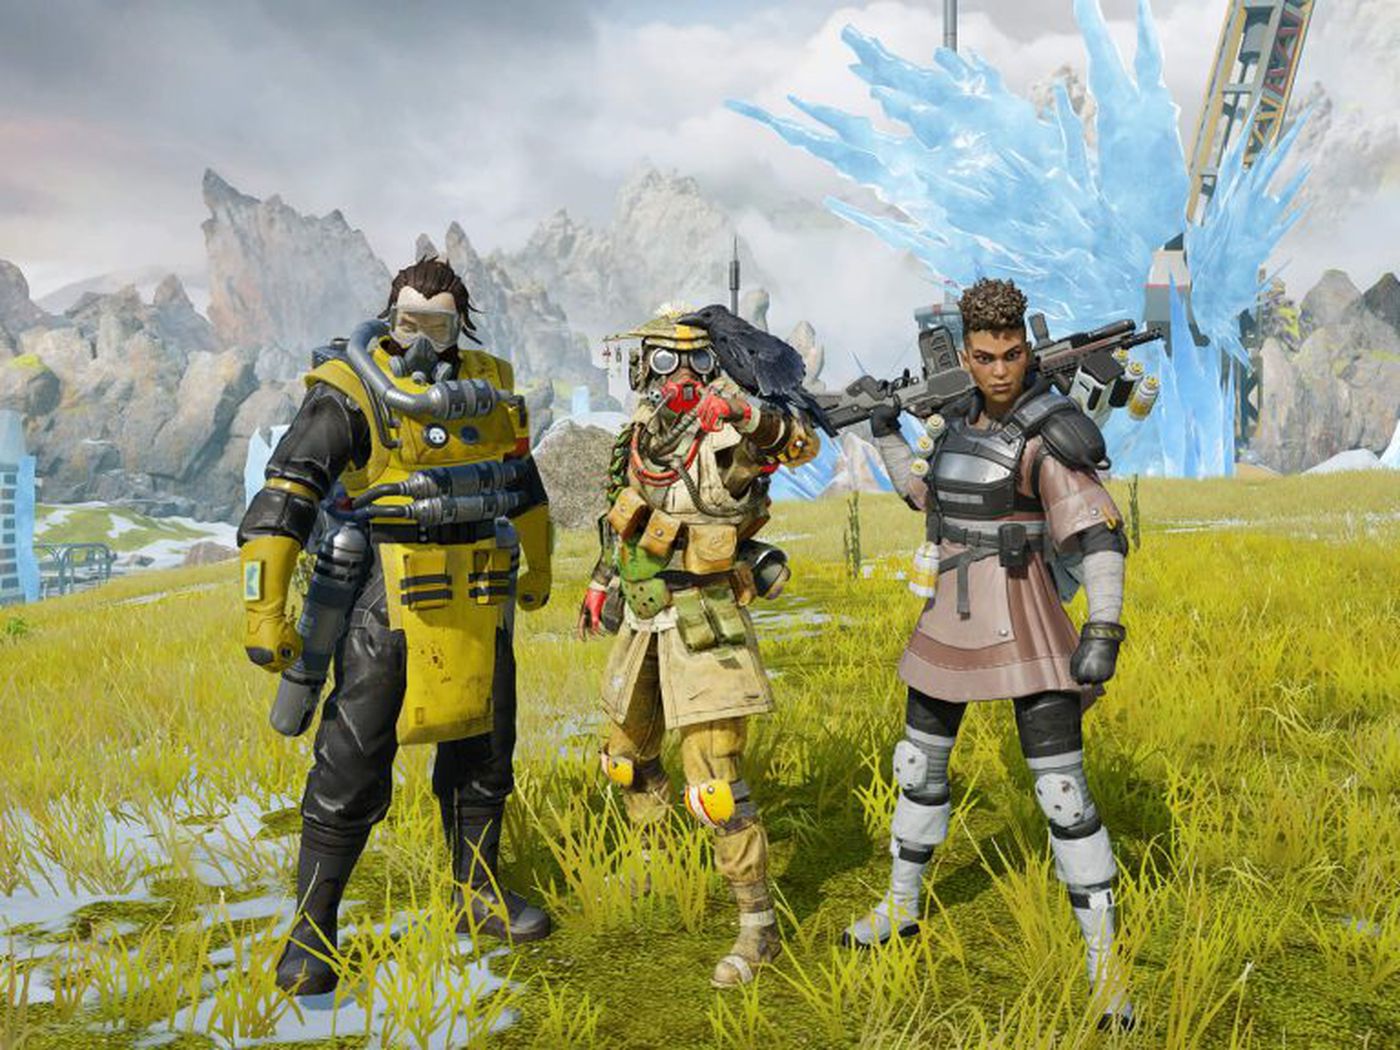 Apex Legends Mobile Requirements Android